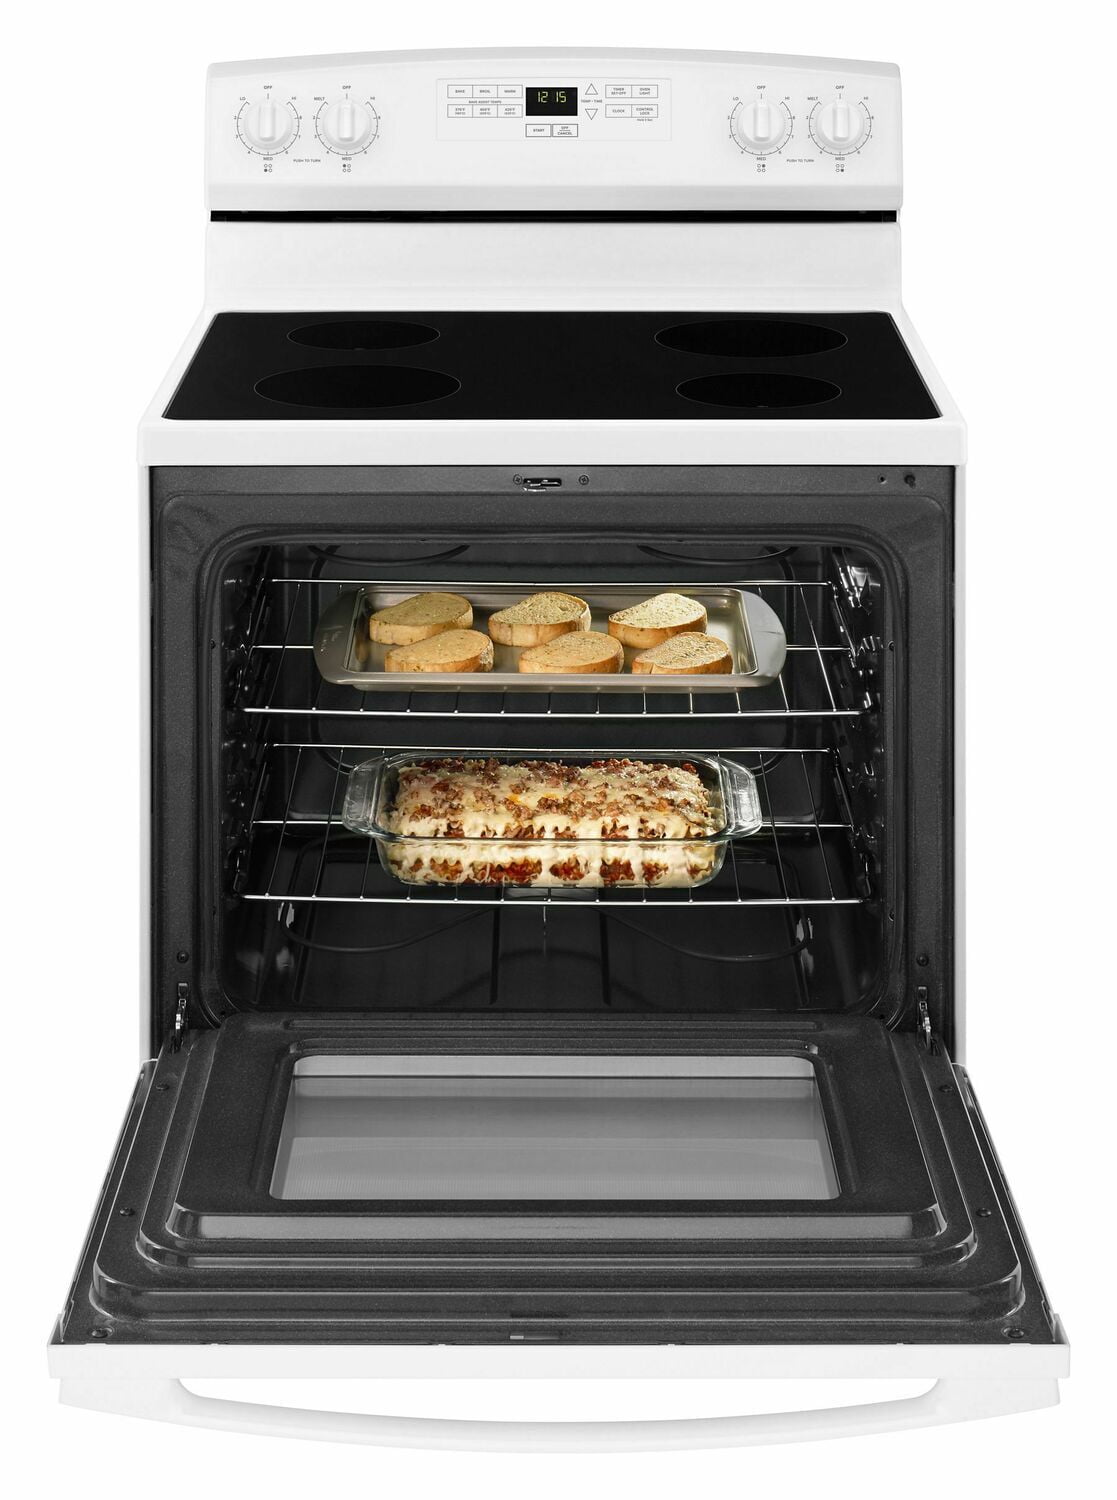 SAVE BIG on GE Calrod Convection Toaster Oven GE Appliances PR